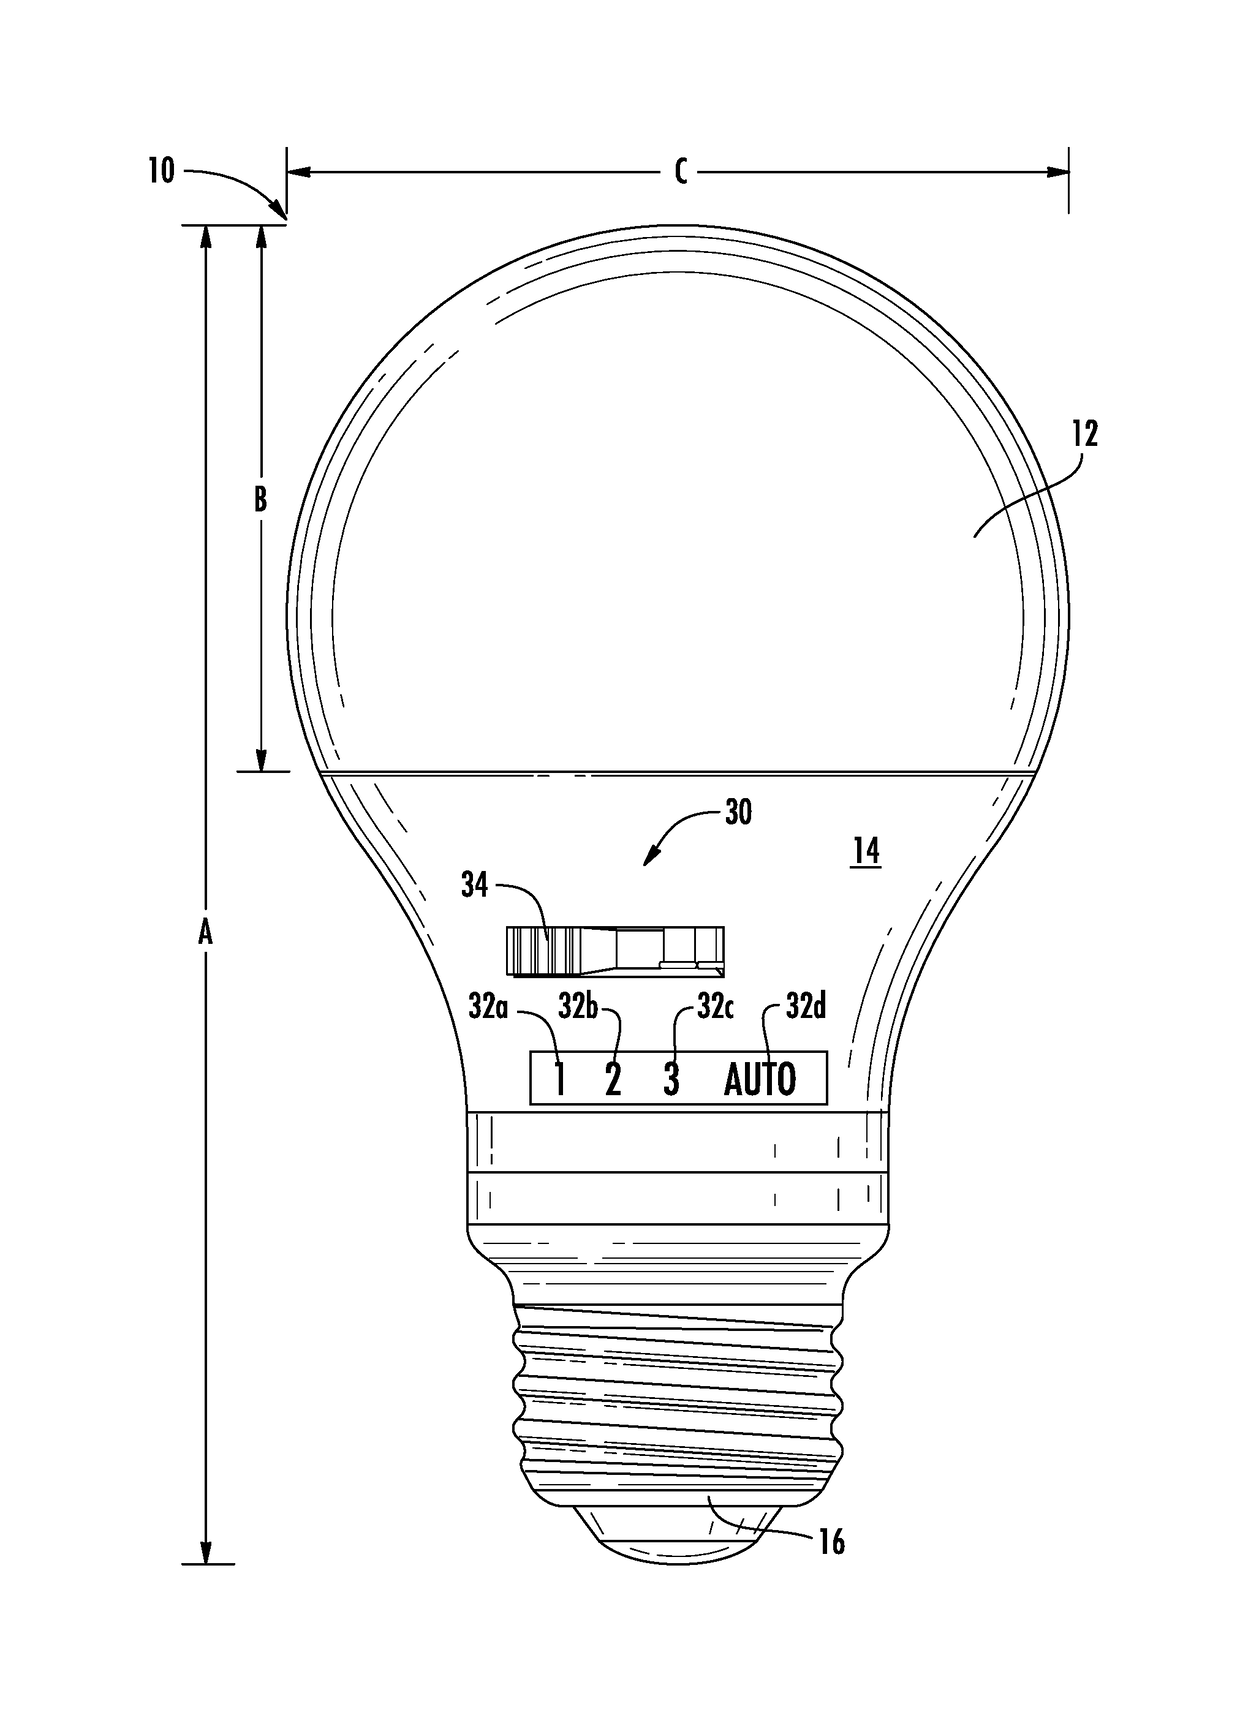 Light emitting diode (LED) lighting device or lamp with configurable light qualities